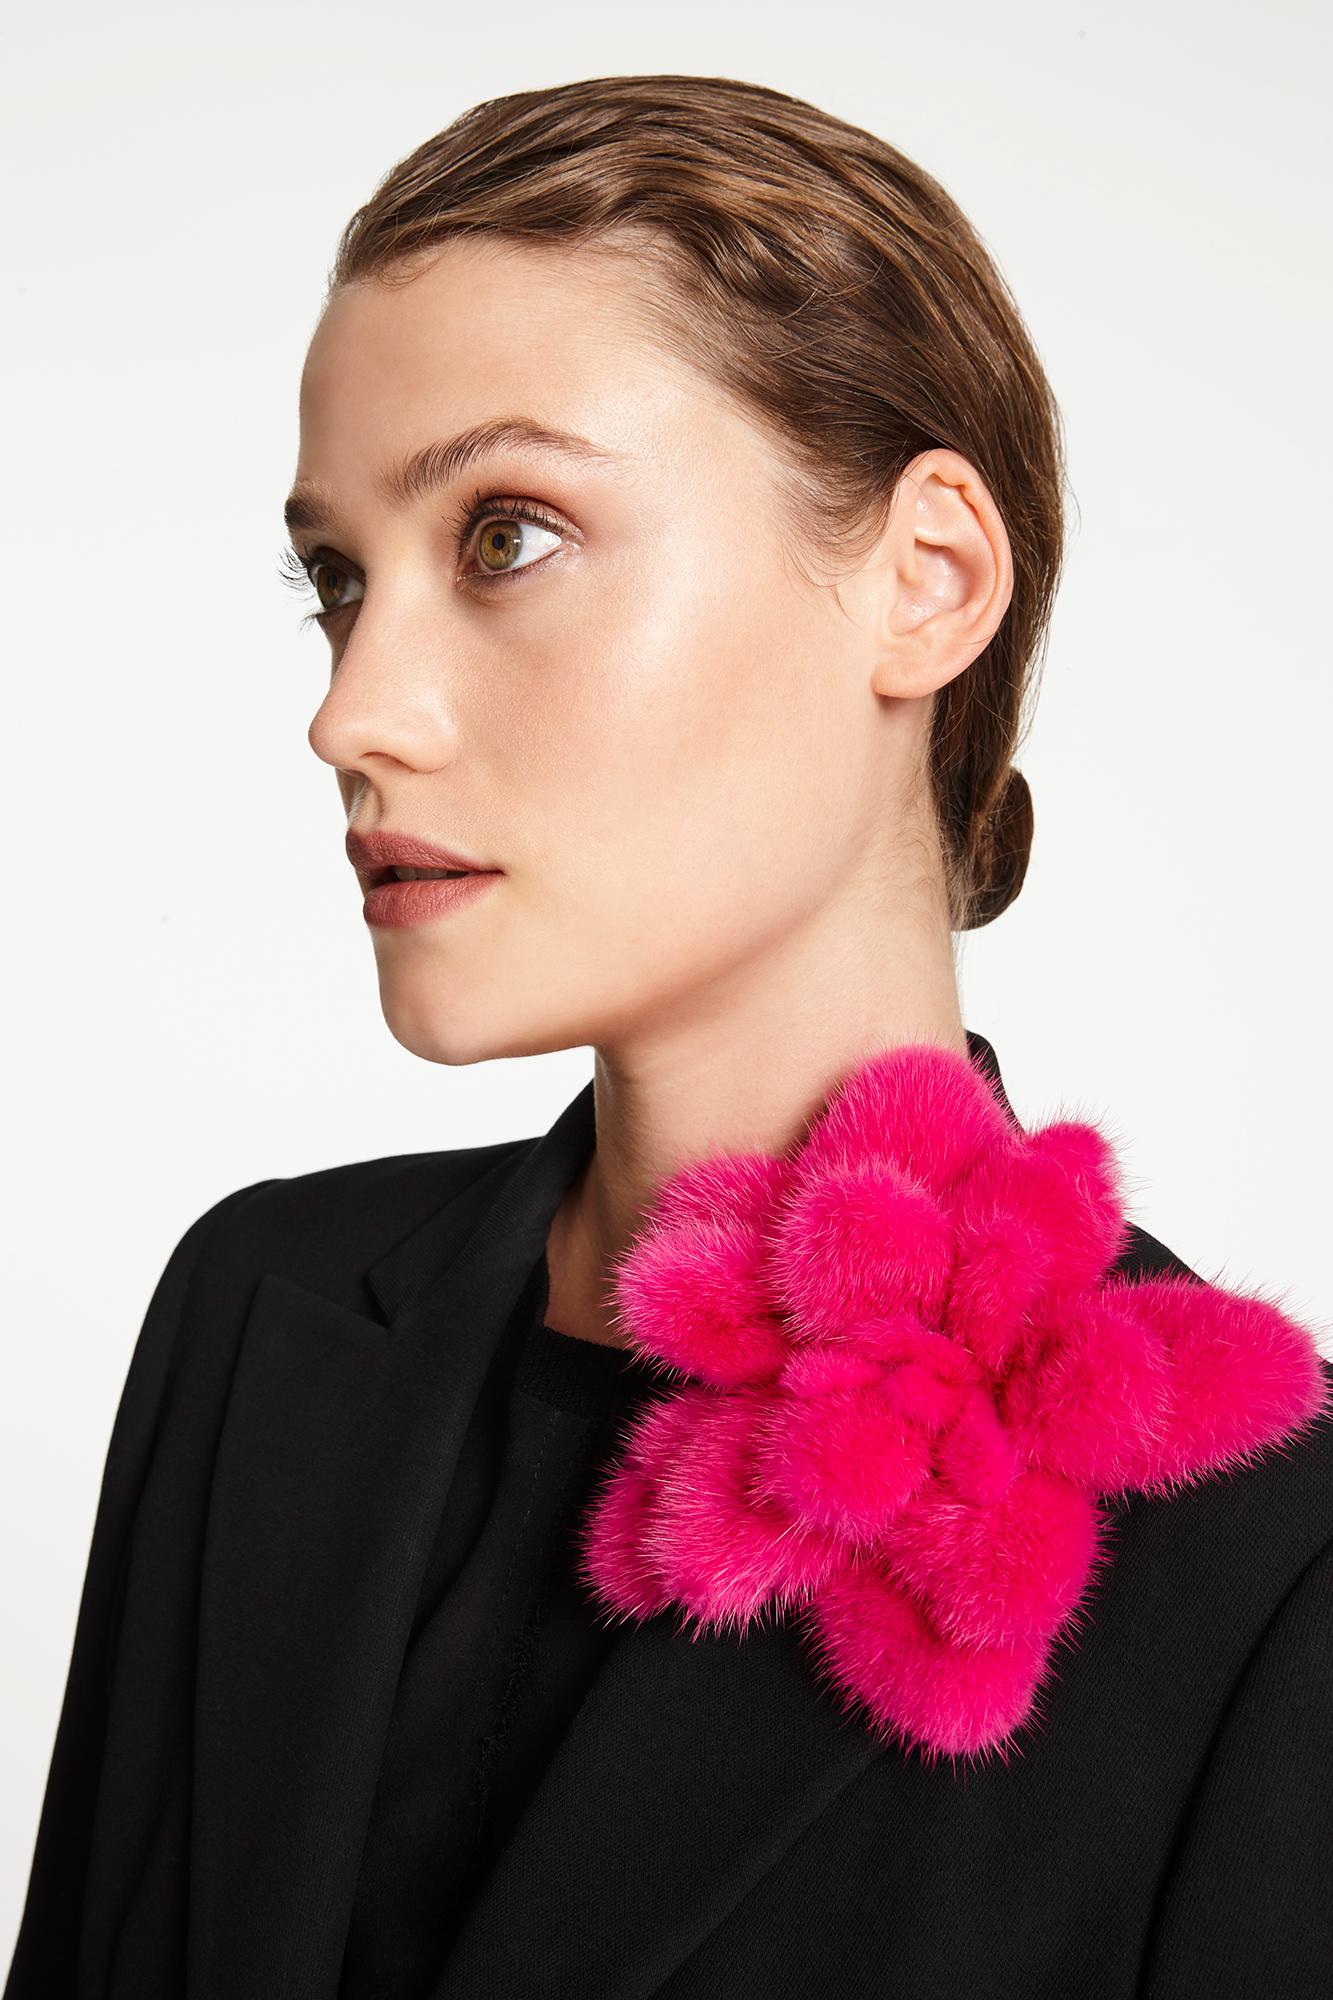 The perfect Christmas gift, this Verheyen London mink fur flower brooch is designed to add a glimmer of warmth and fun to your look.  Wear on your favourite winter knit or over a cape for glamour.

PRODUCT DETAILS

Colour: Fuchsia Pink
Material: